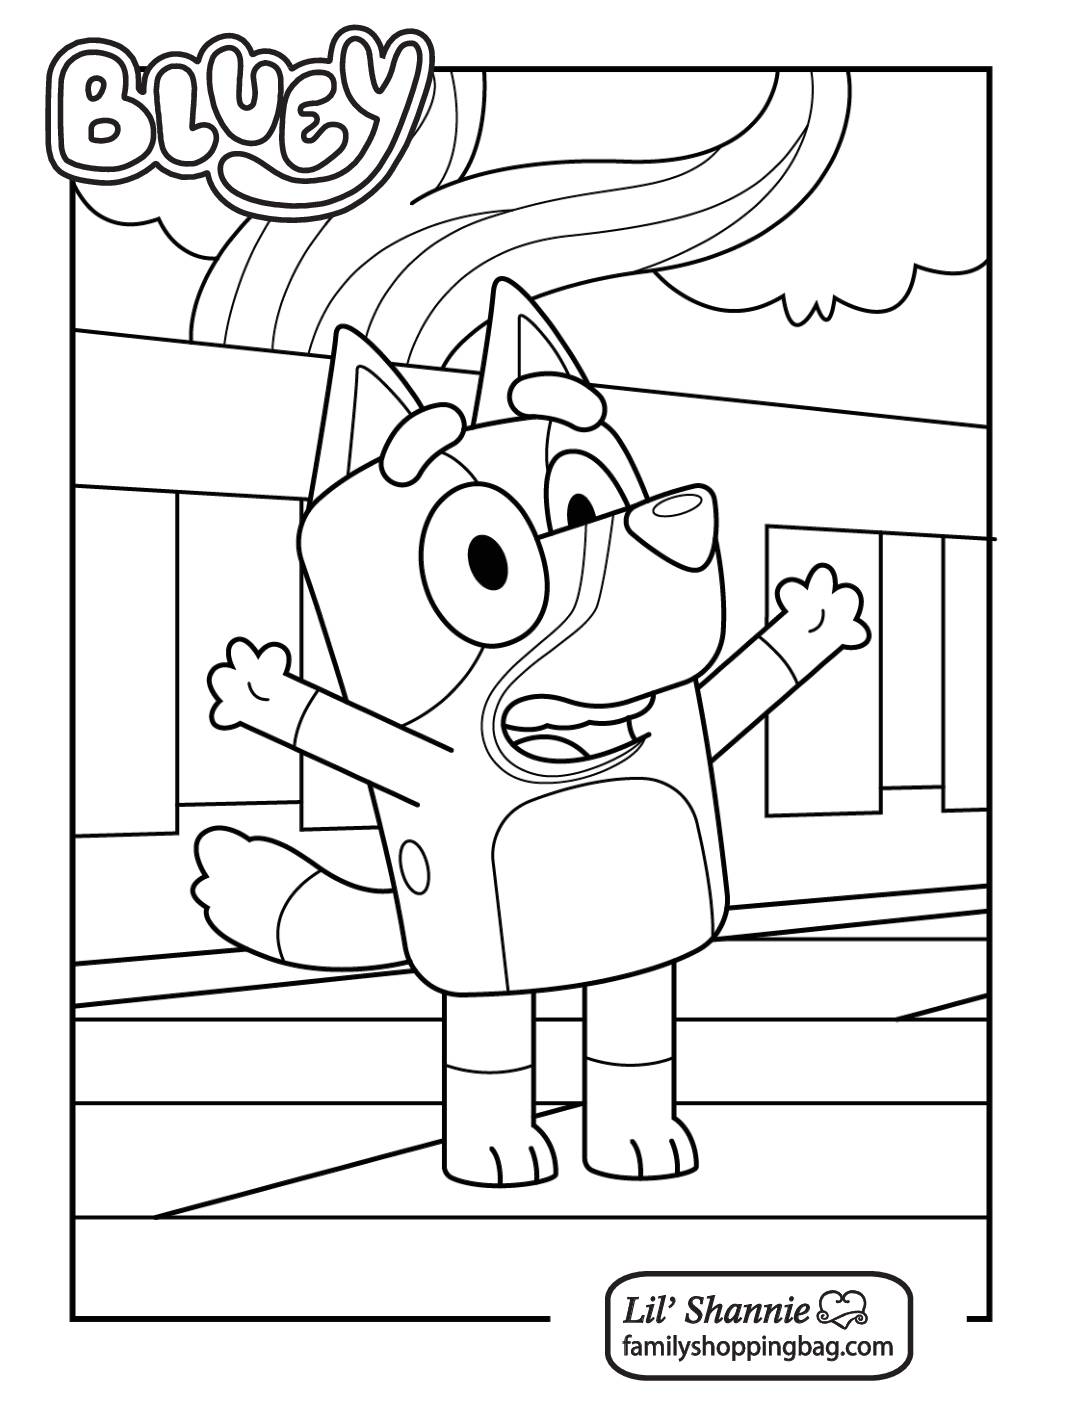 Coloring Page 20 Bluey